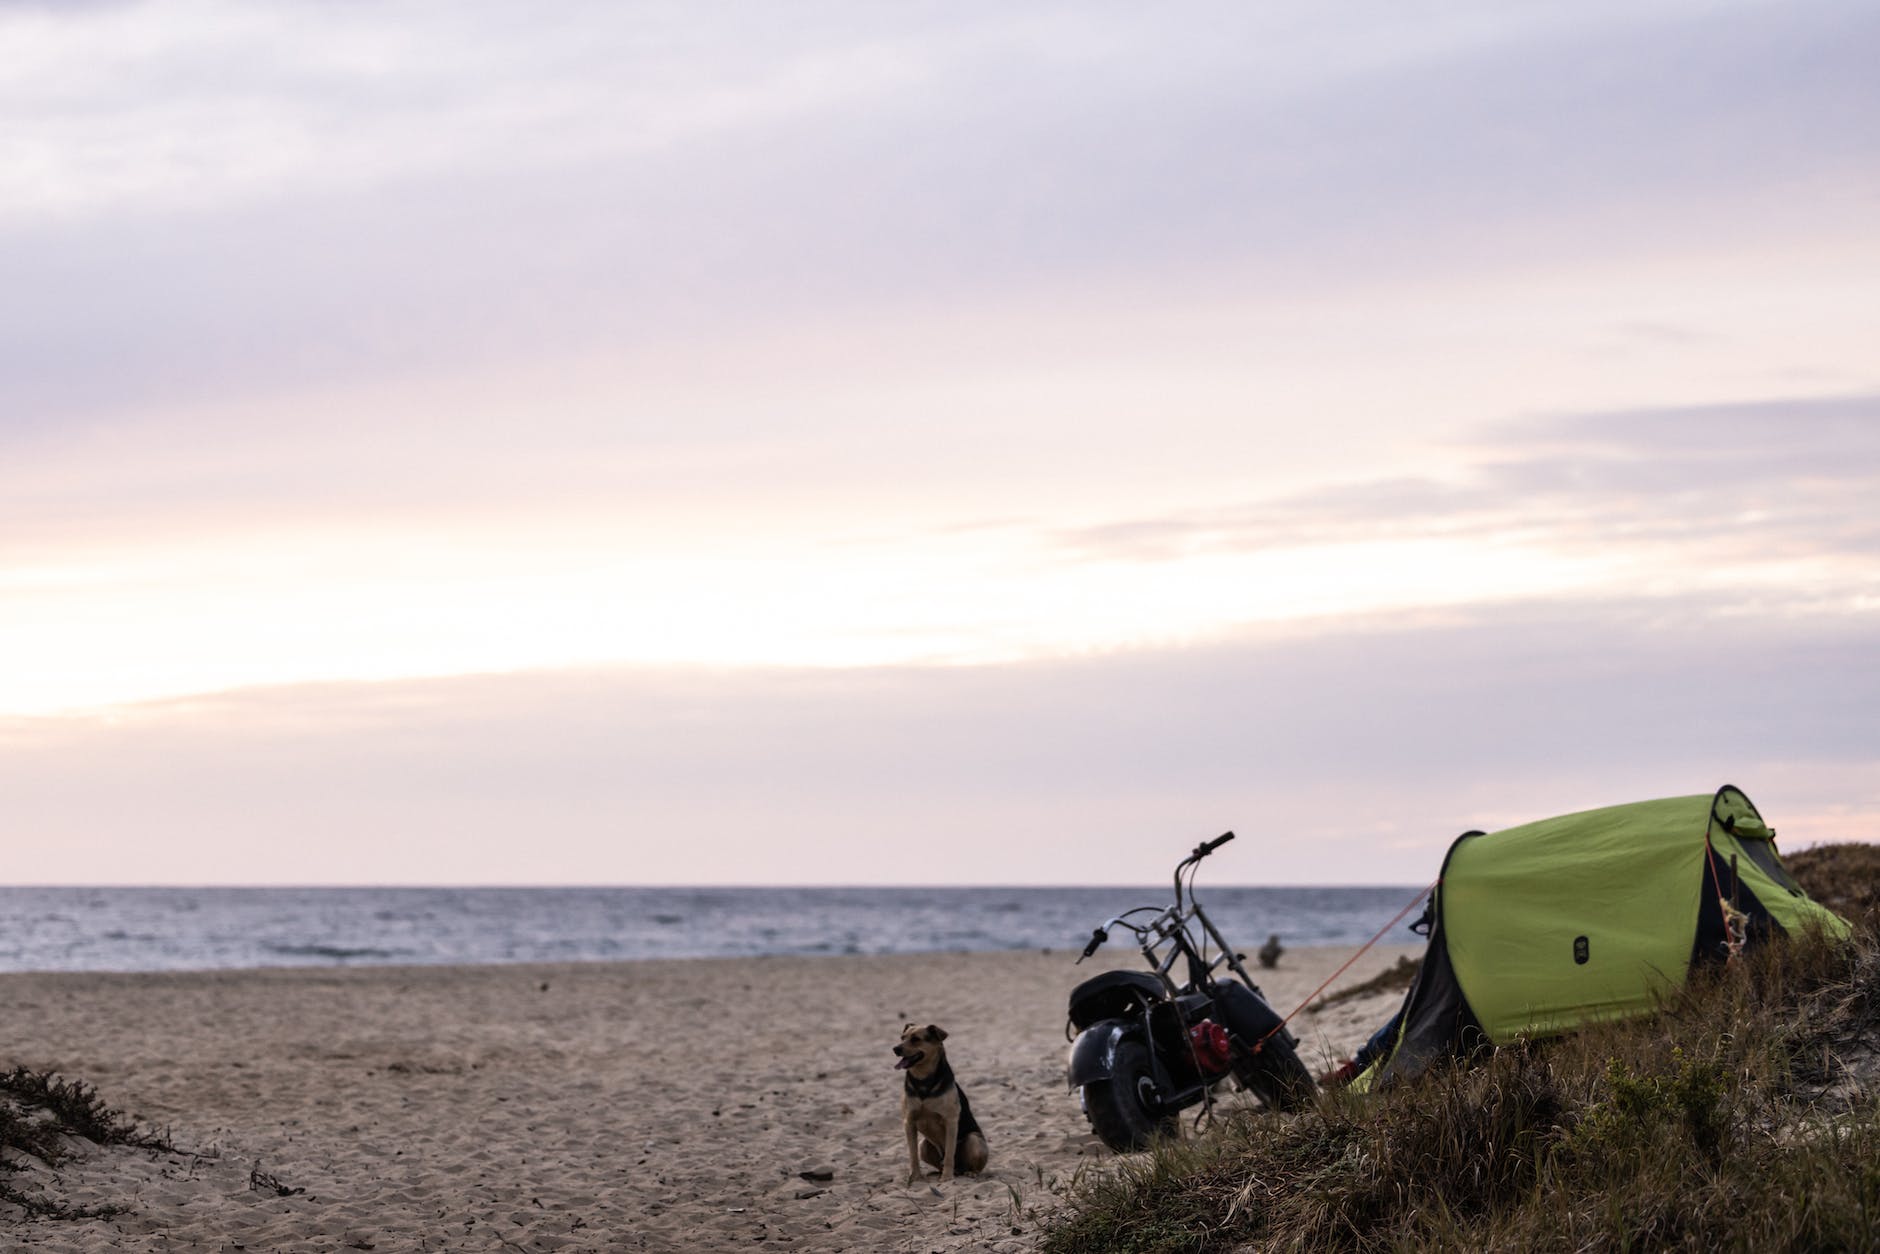 a dog sitting on the beach next to a motorcycle and a tent